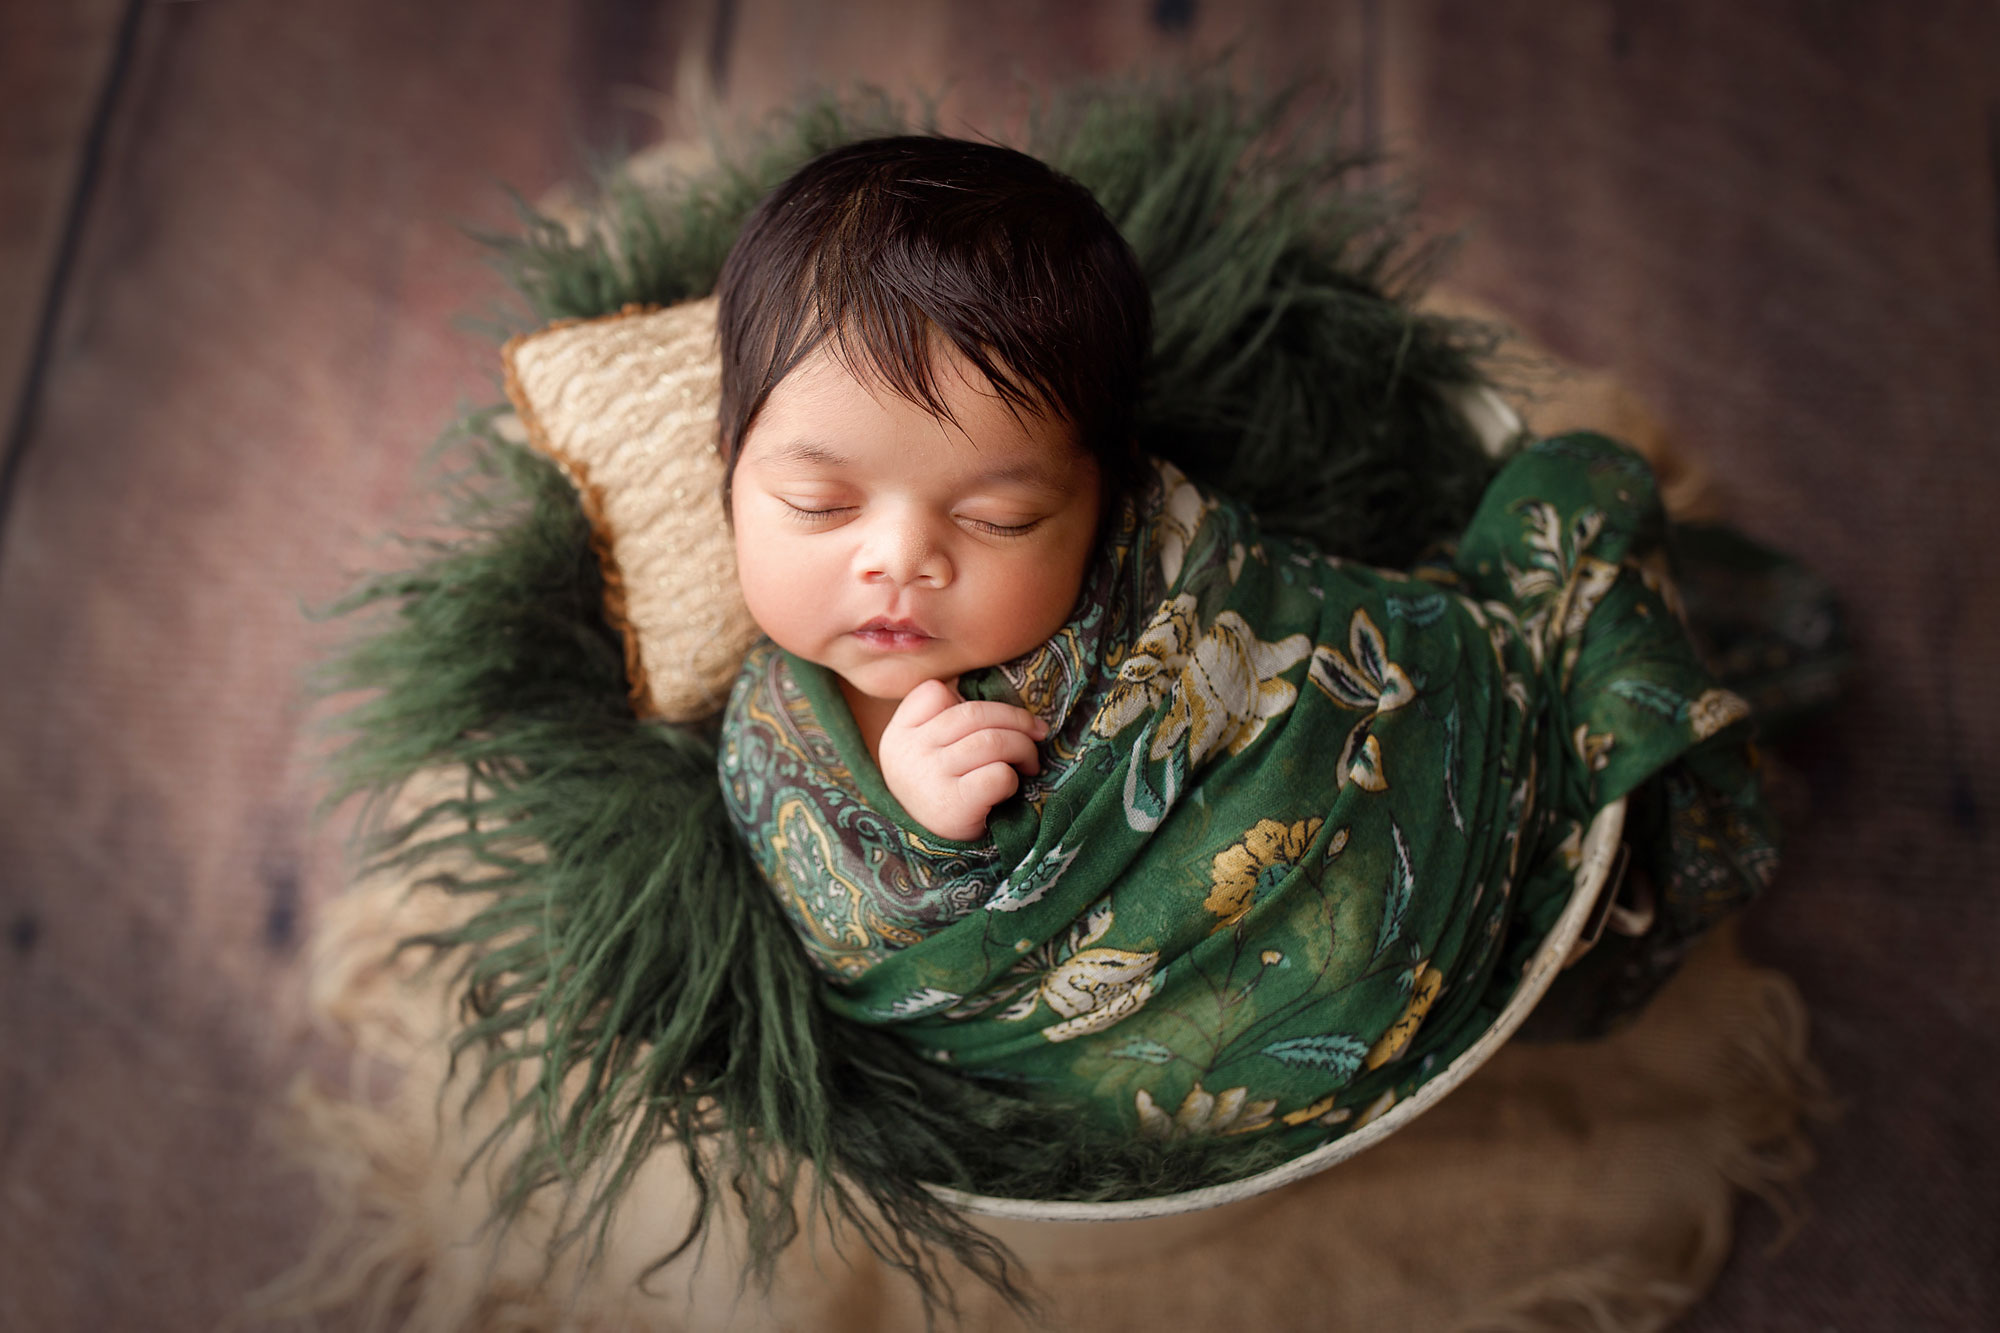 baby photographer bergen county nj, baby sleeping in bucket with green fur and floral wrap